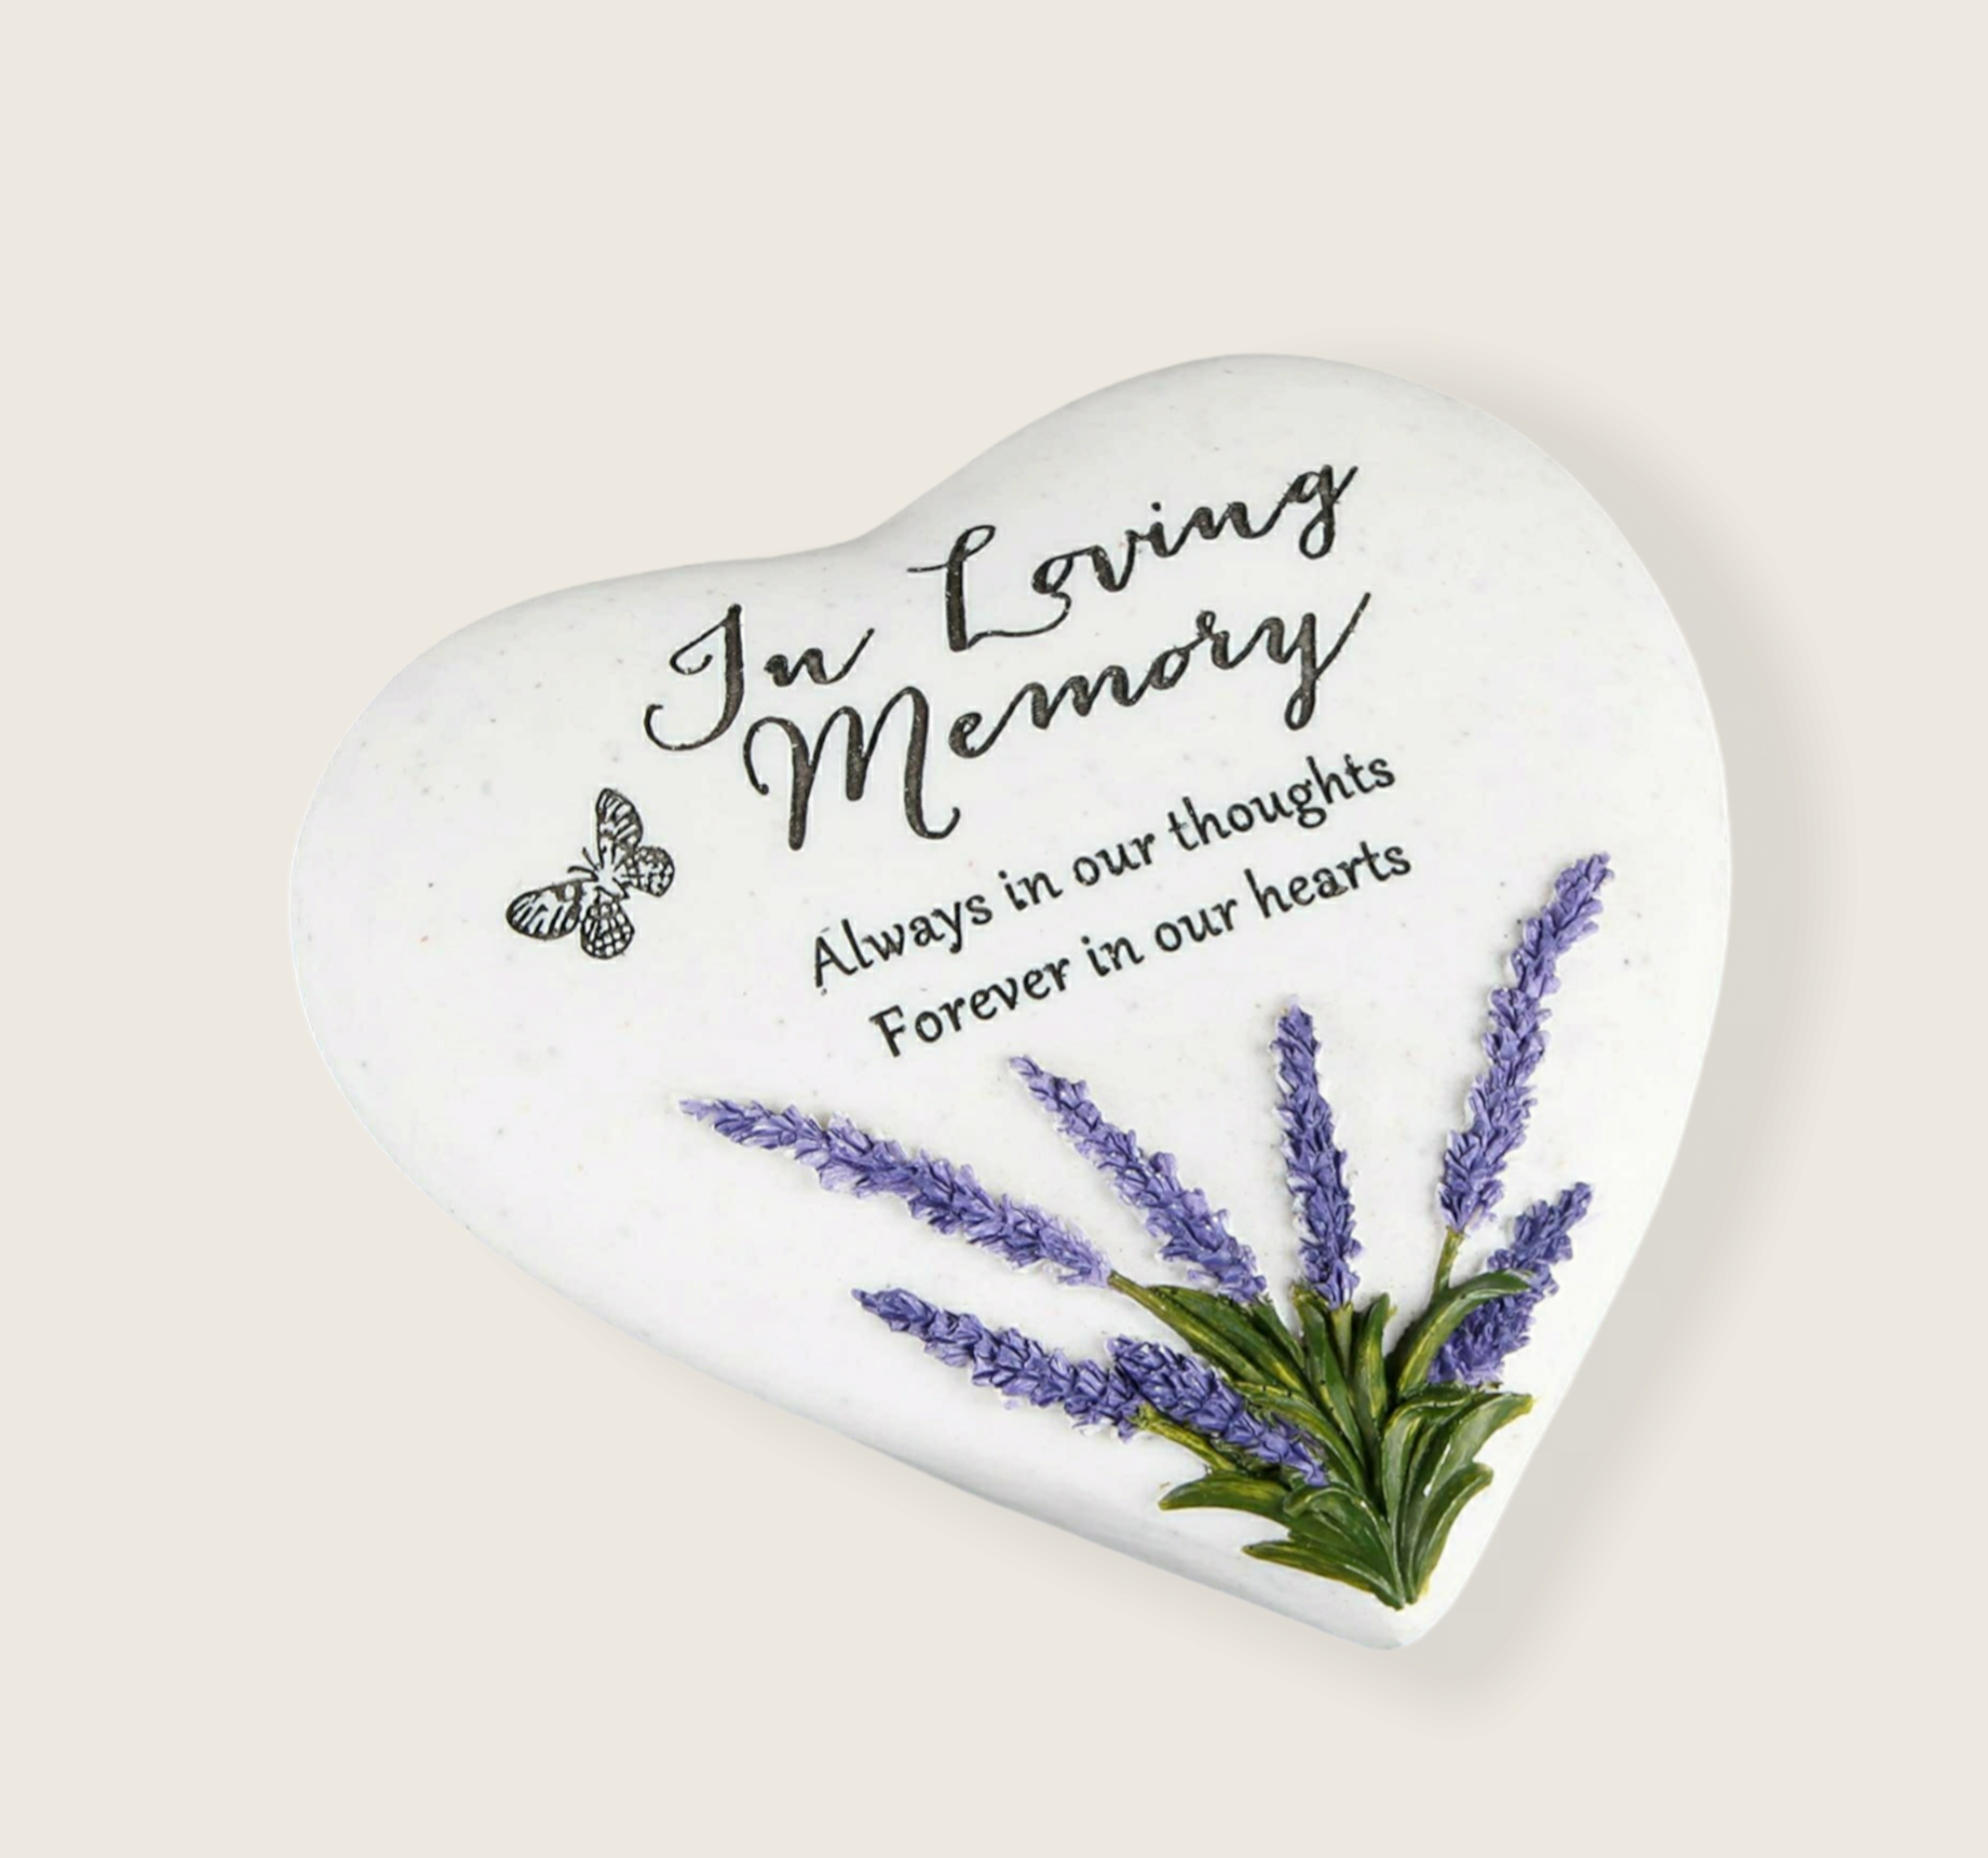 In Loving Memory –  Heart Shape Stone with Lavender design